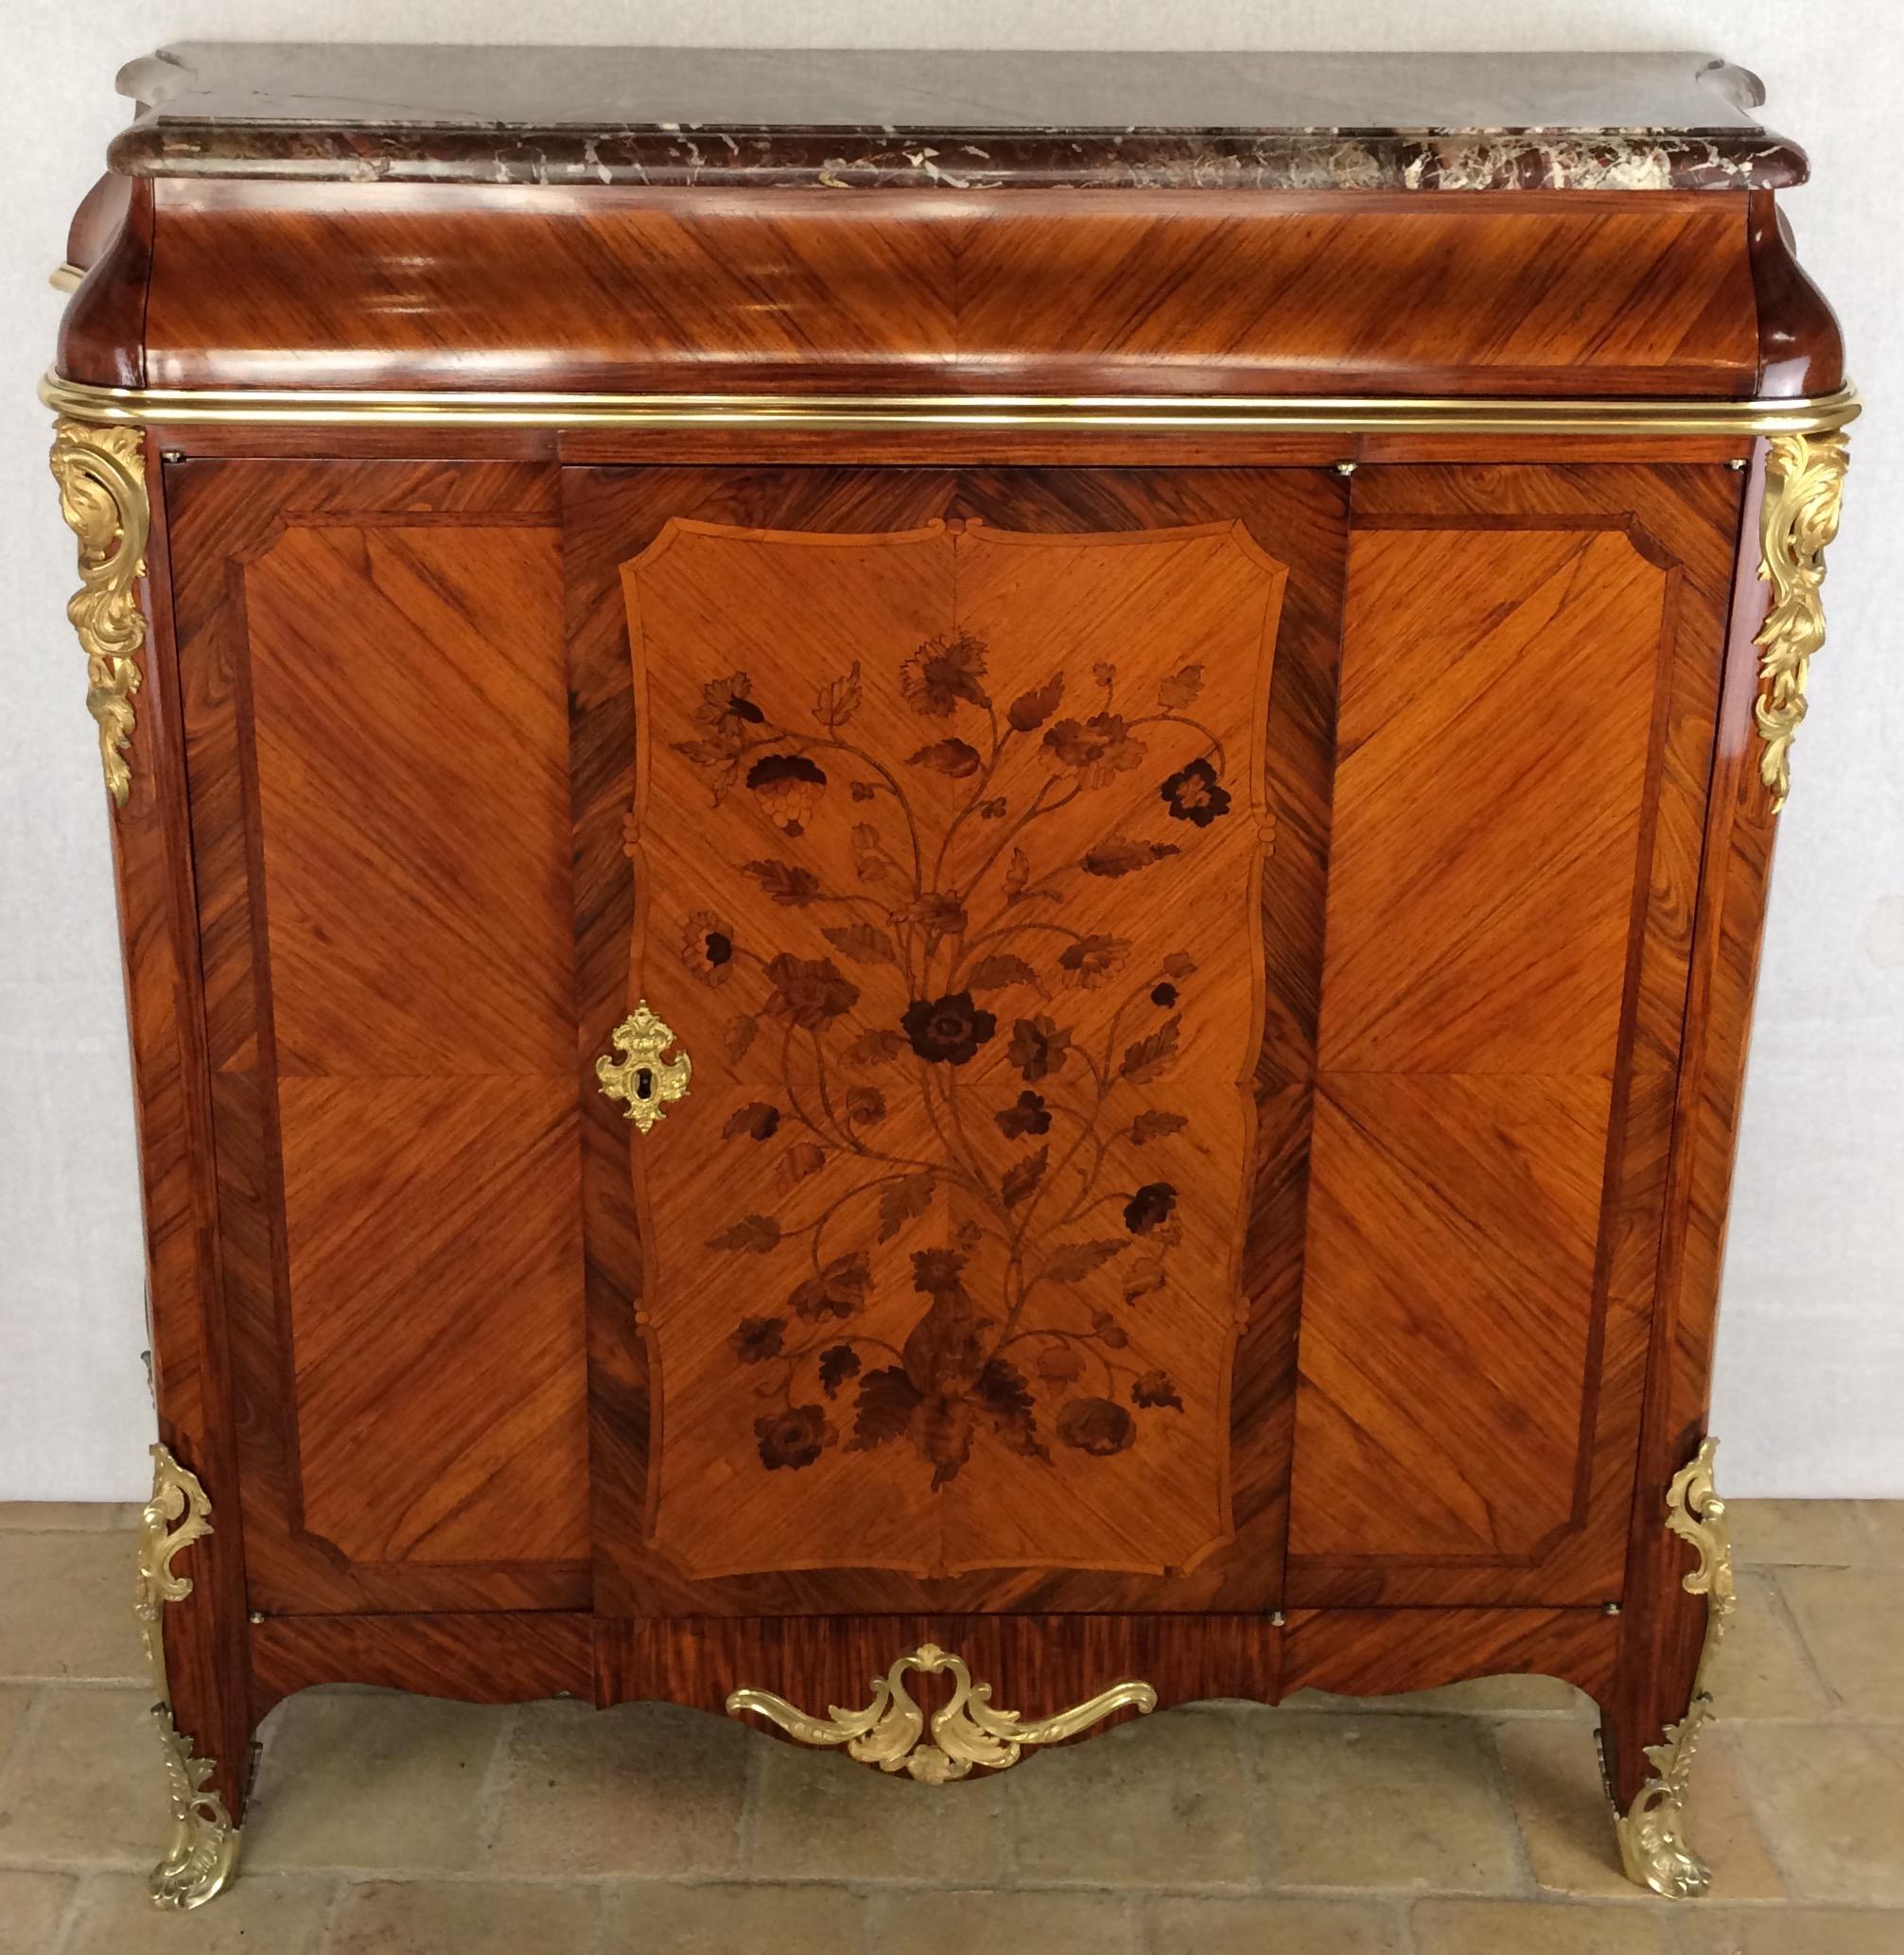 A very fine Louis XV Style cabinet in the manner of Paul Sormani.

This exquisite and very well proportioned cabinet is made of bois violette or kingwood, with well executed floral inlays. Extensive gilt bronze mounts of exceptional quality. The